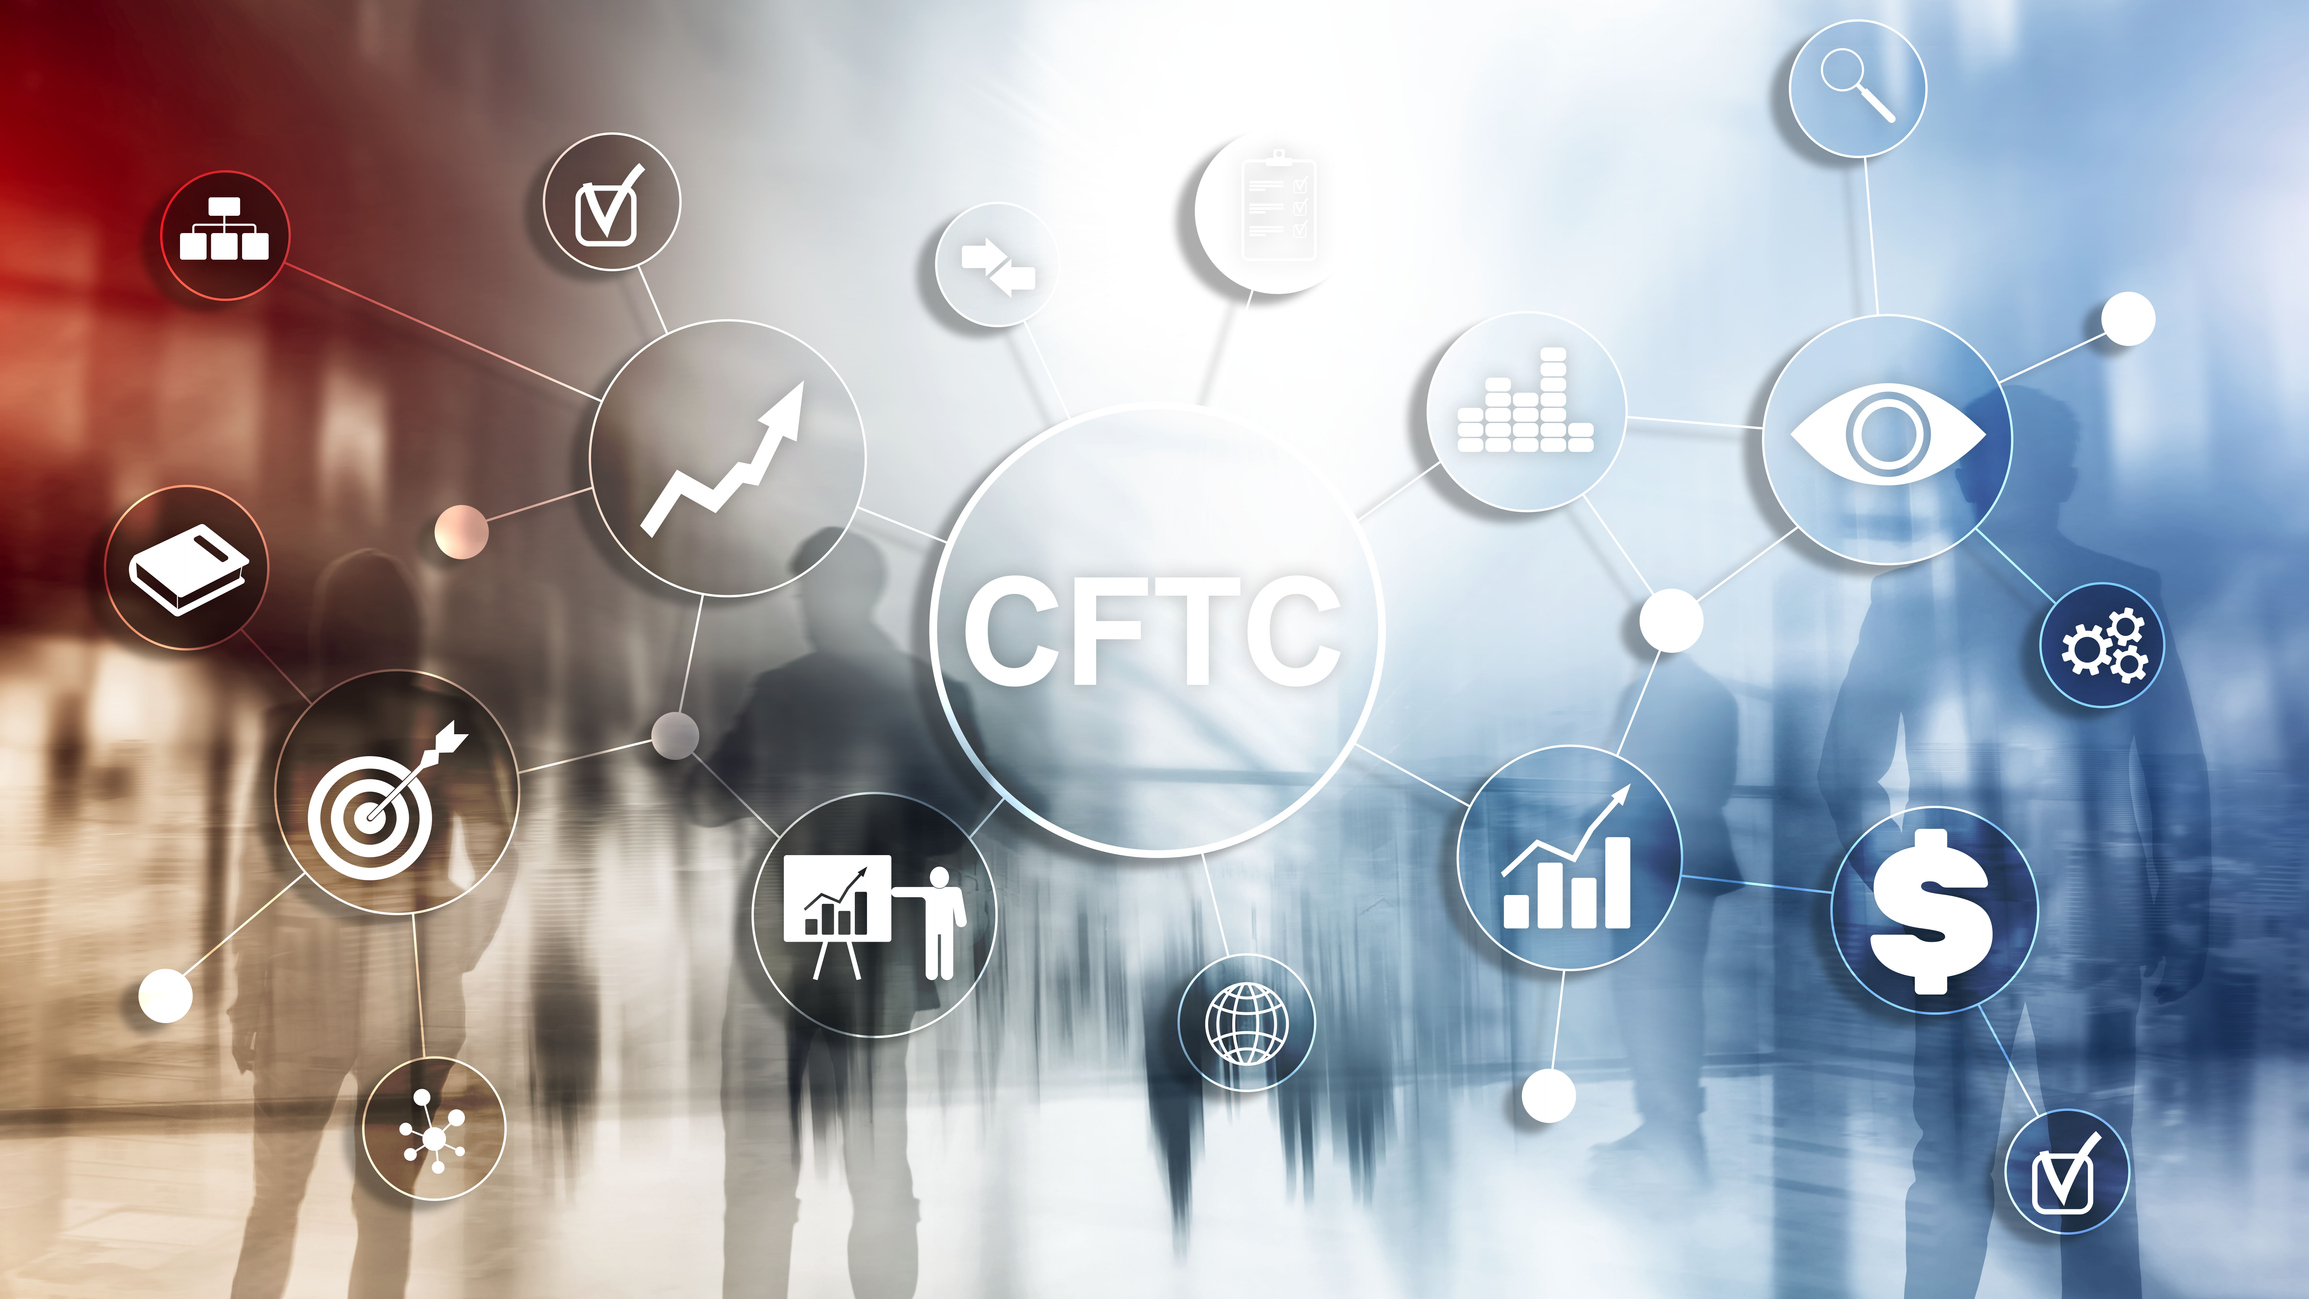 CFTC_CFTC u.s. commodity futures trading commission business finance regulation concept